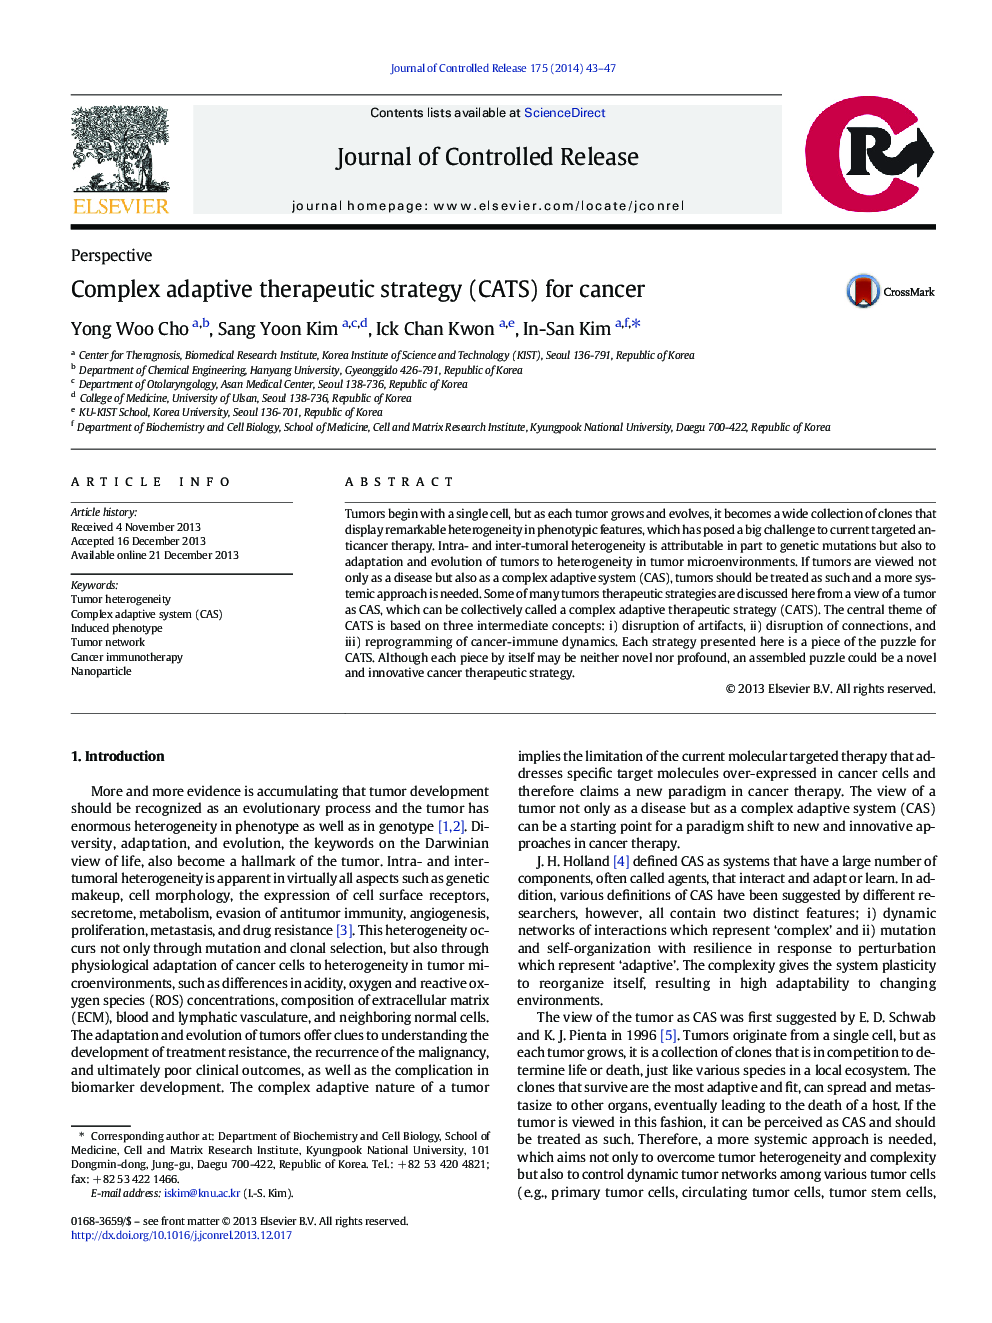 Complex adaptive therapeutic strategy (CATS) for cancer